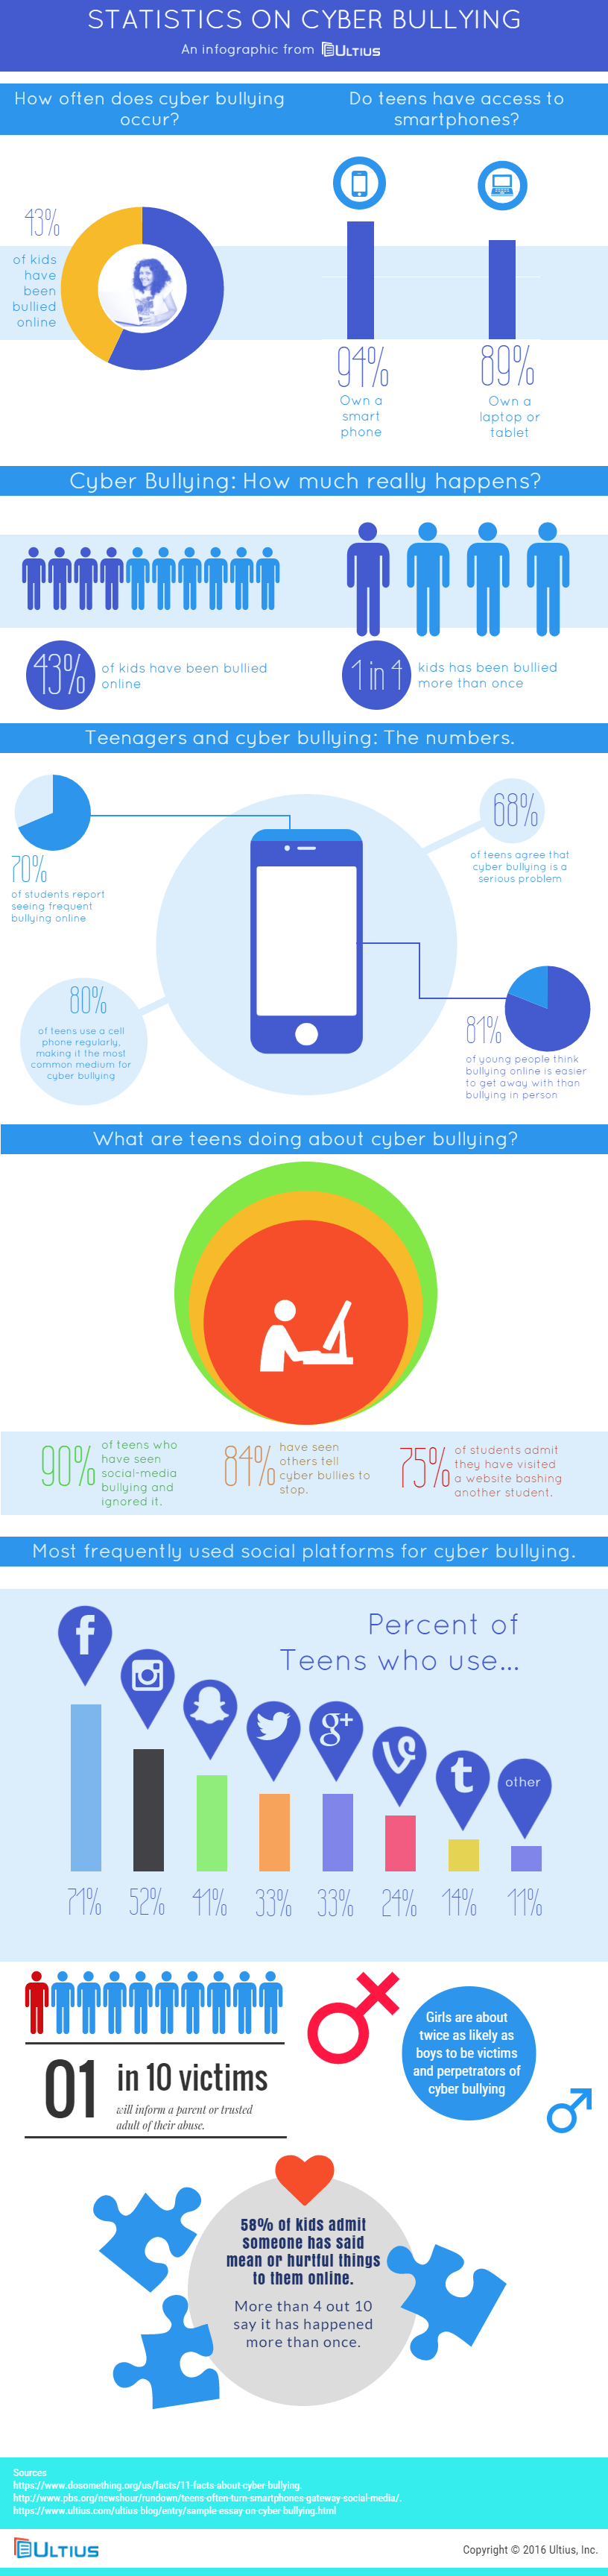 Cyber bullying statistics infographic